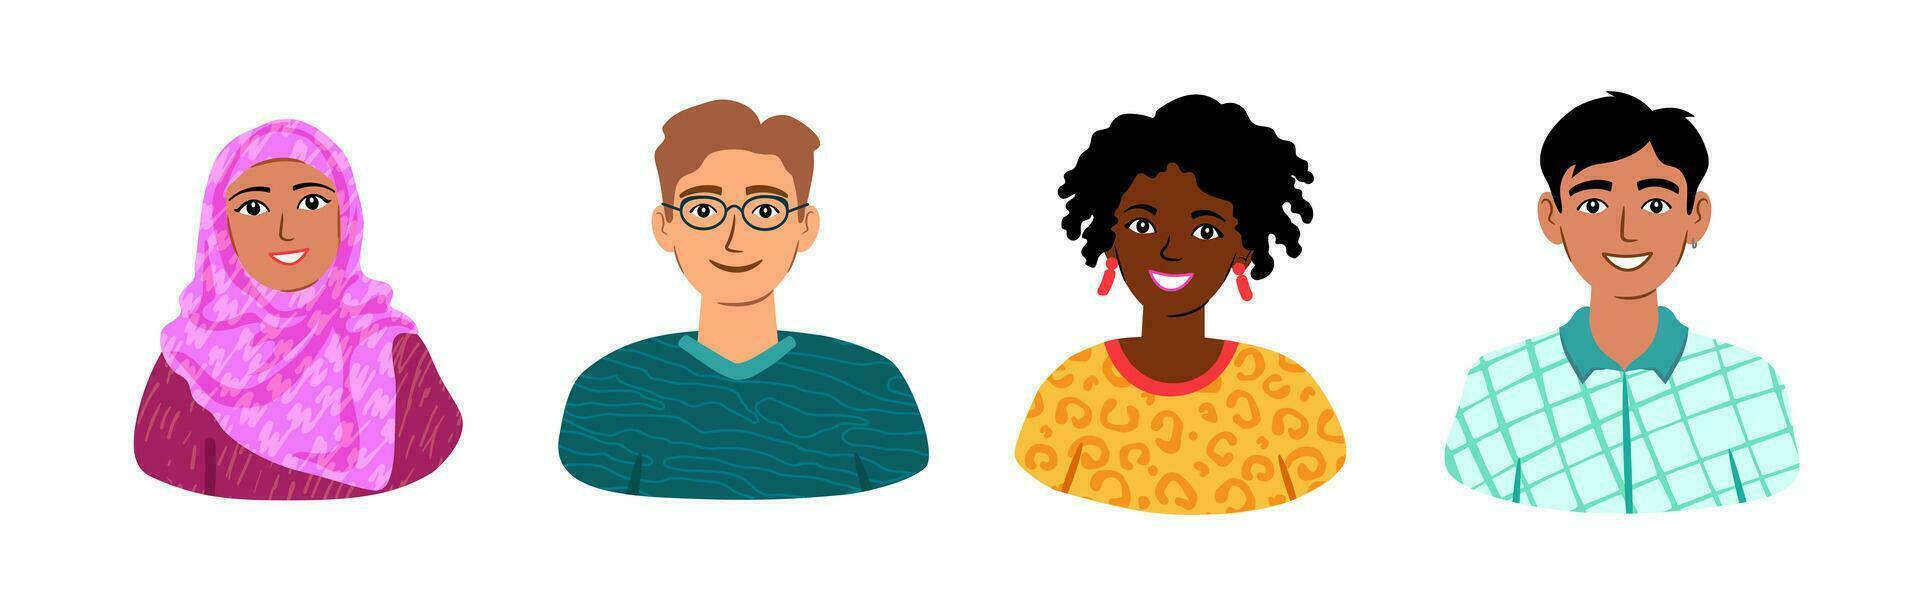 Four young people diverse students coworkers vector